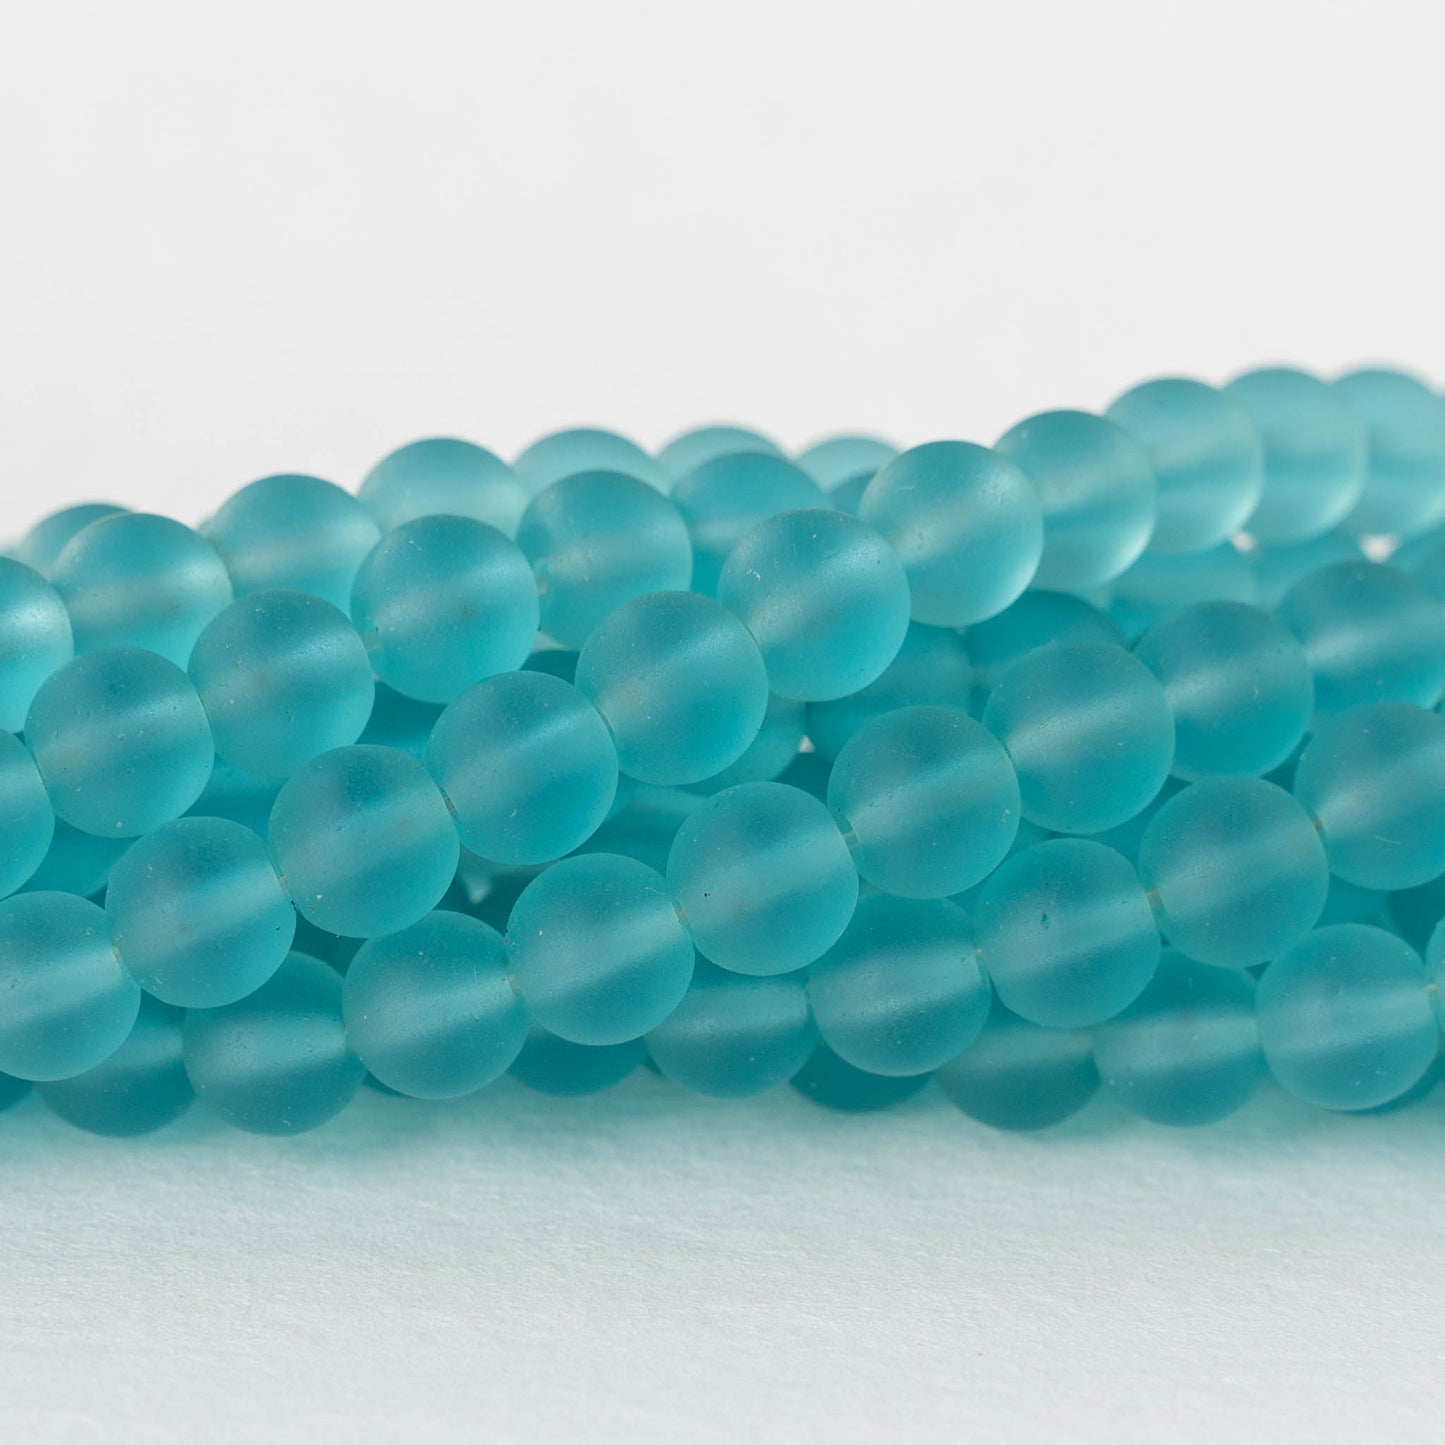 6mm Frosted Glass Rounds - Light Aqua Matte - 16 Inches